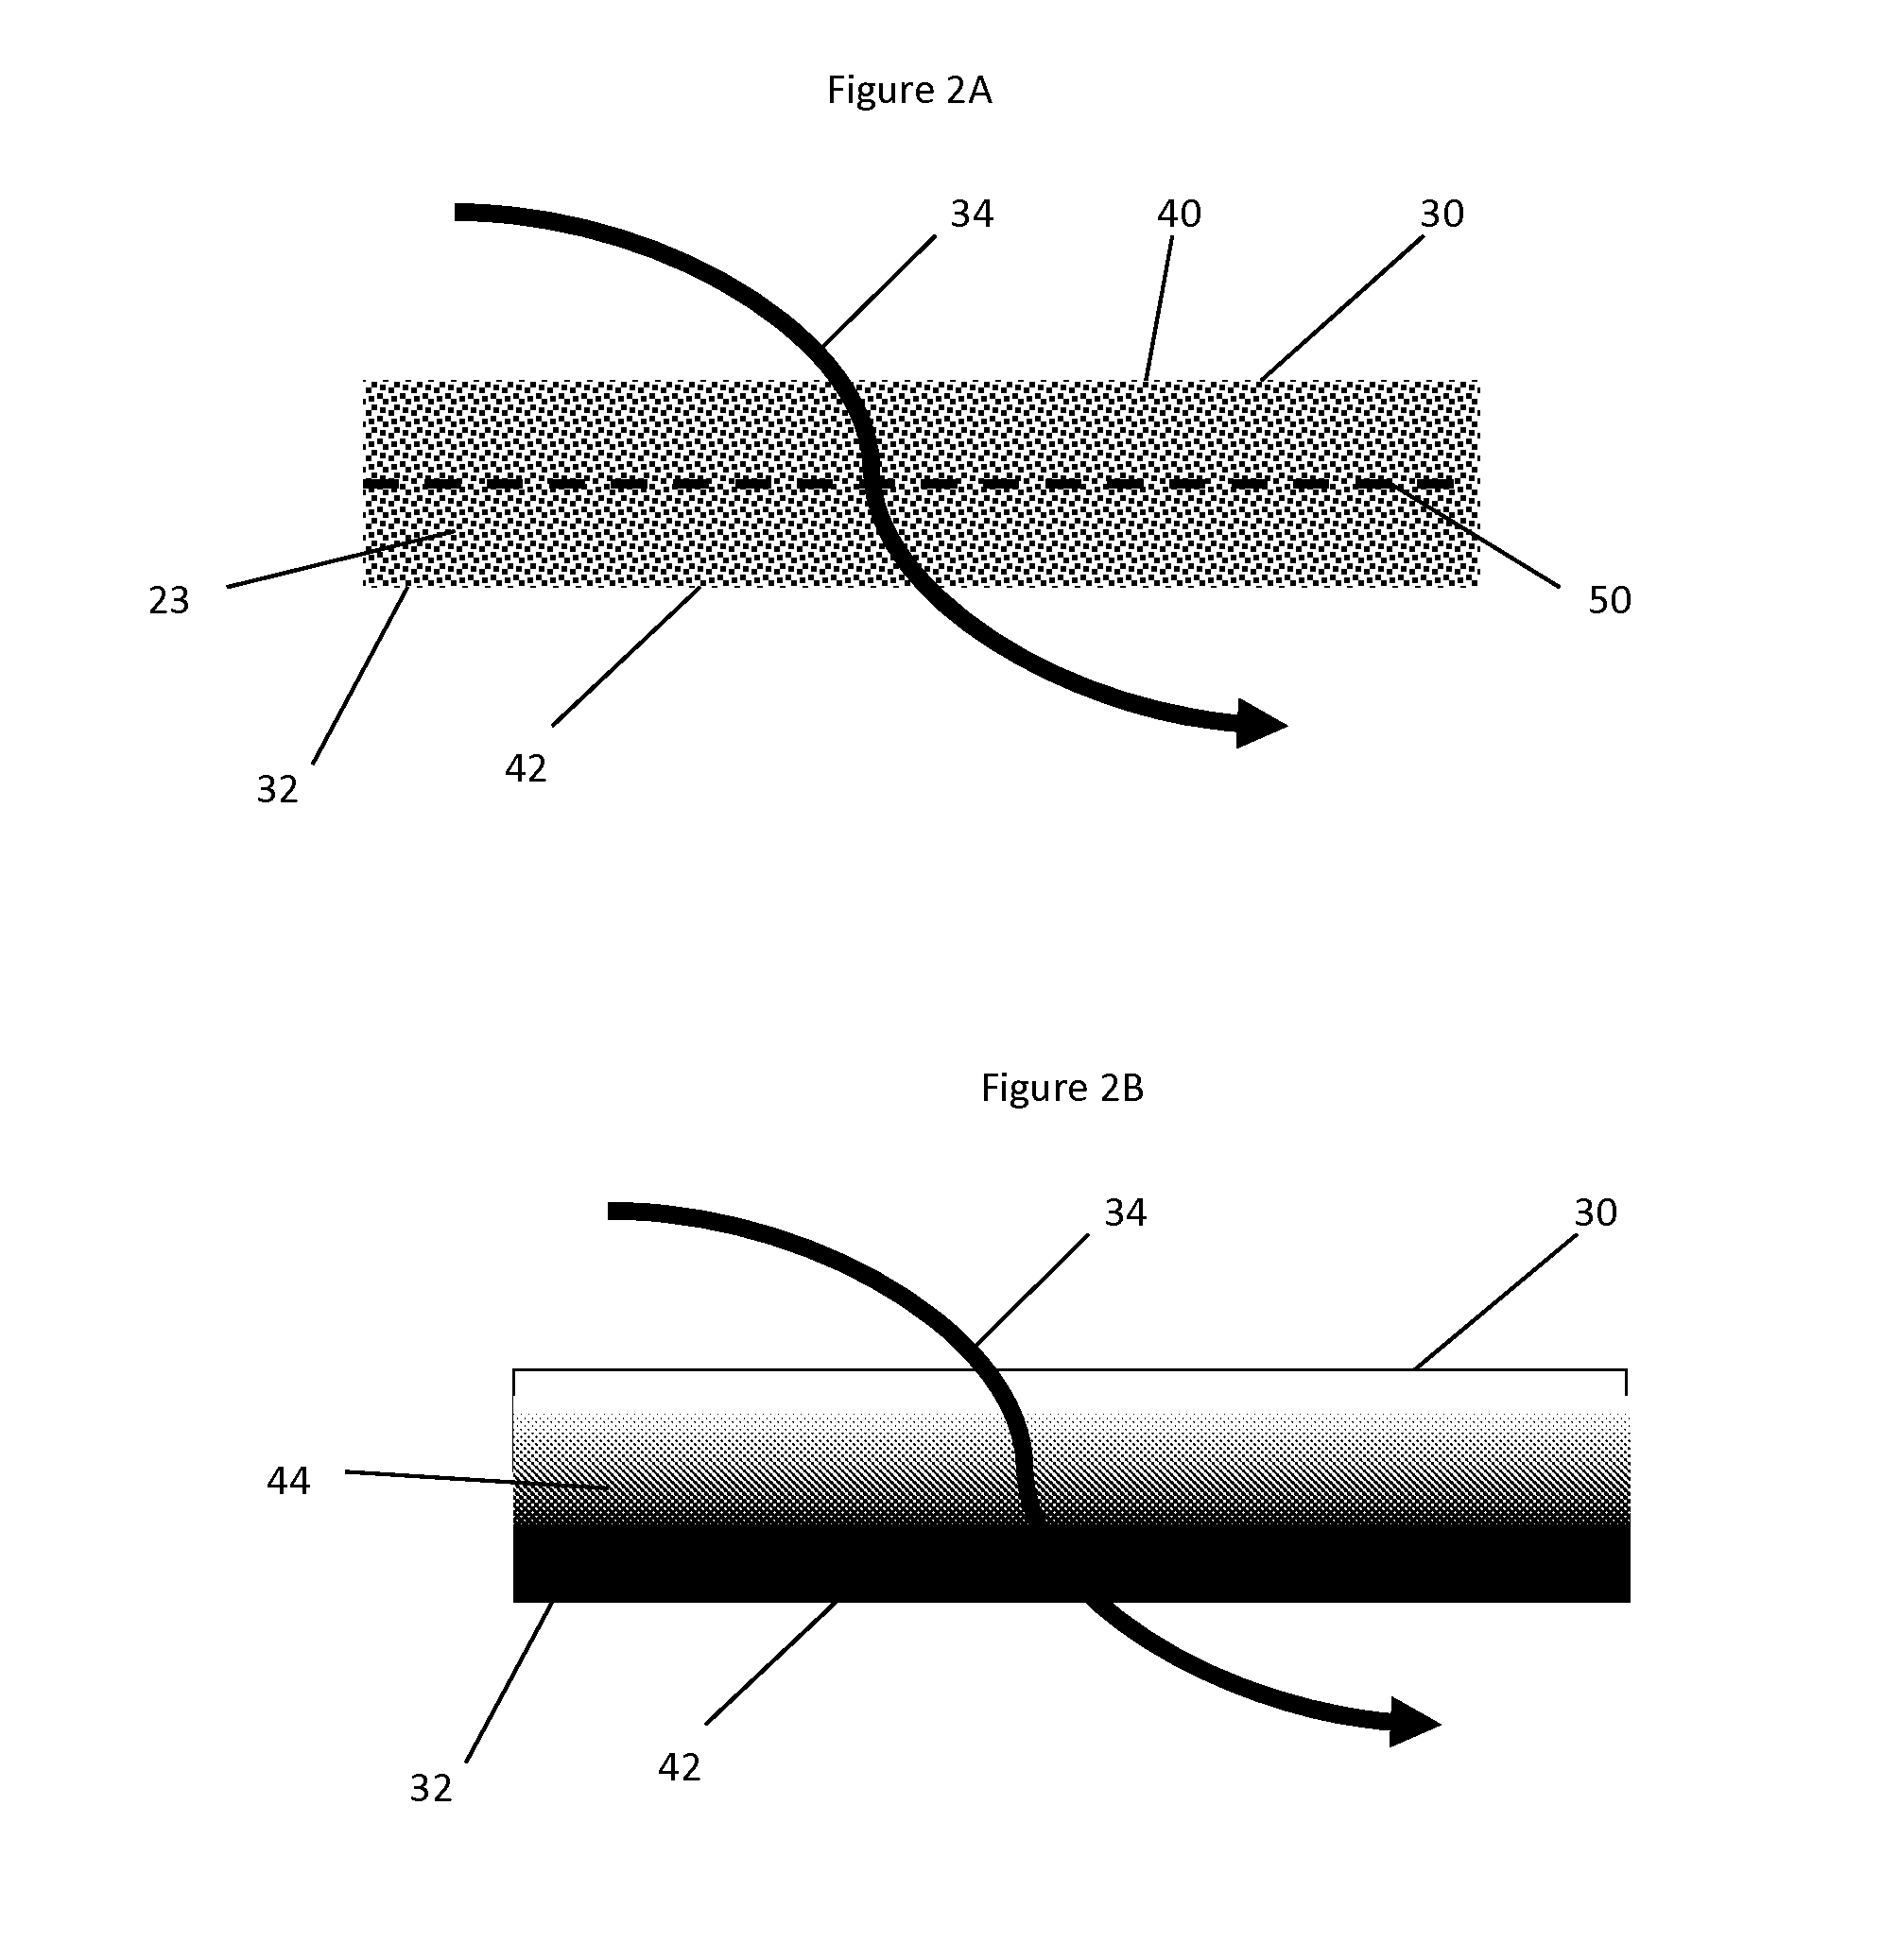 Catalyzed Filter for Treating Exhaust Gas